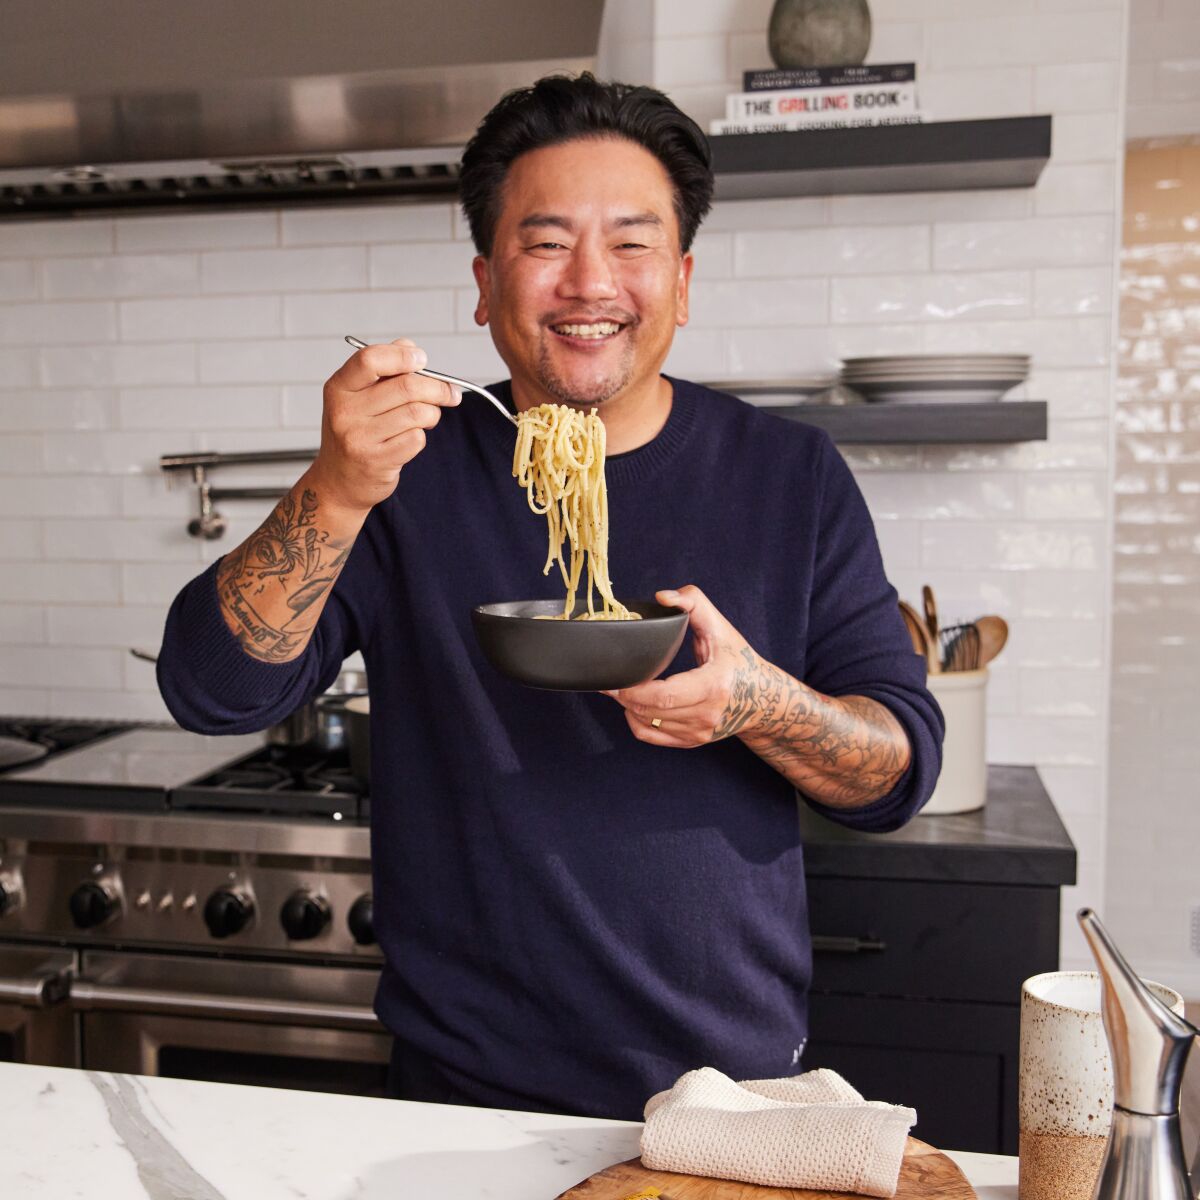 Kogi chef-founder Roy Choi recently launched a line of seasoning bases for home cooking